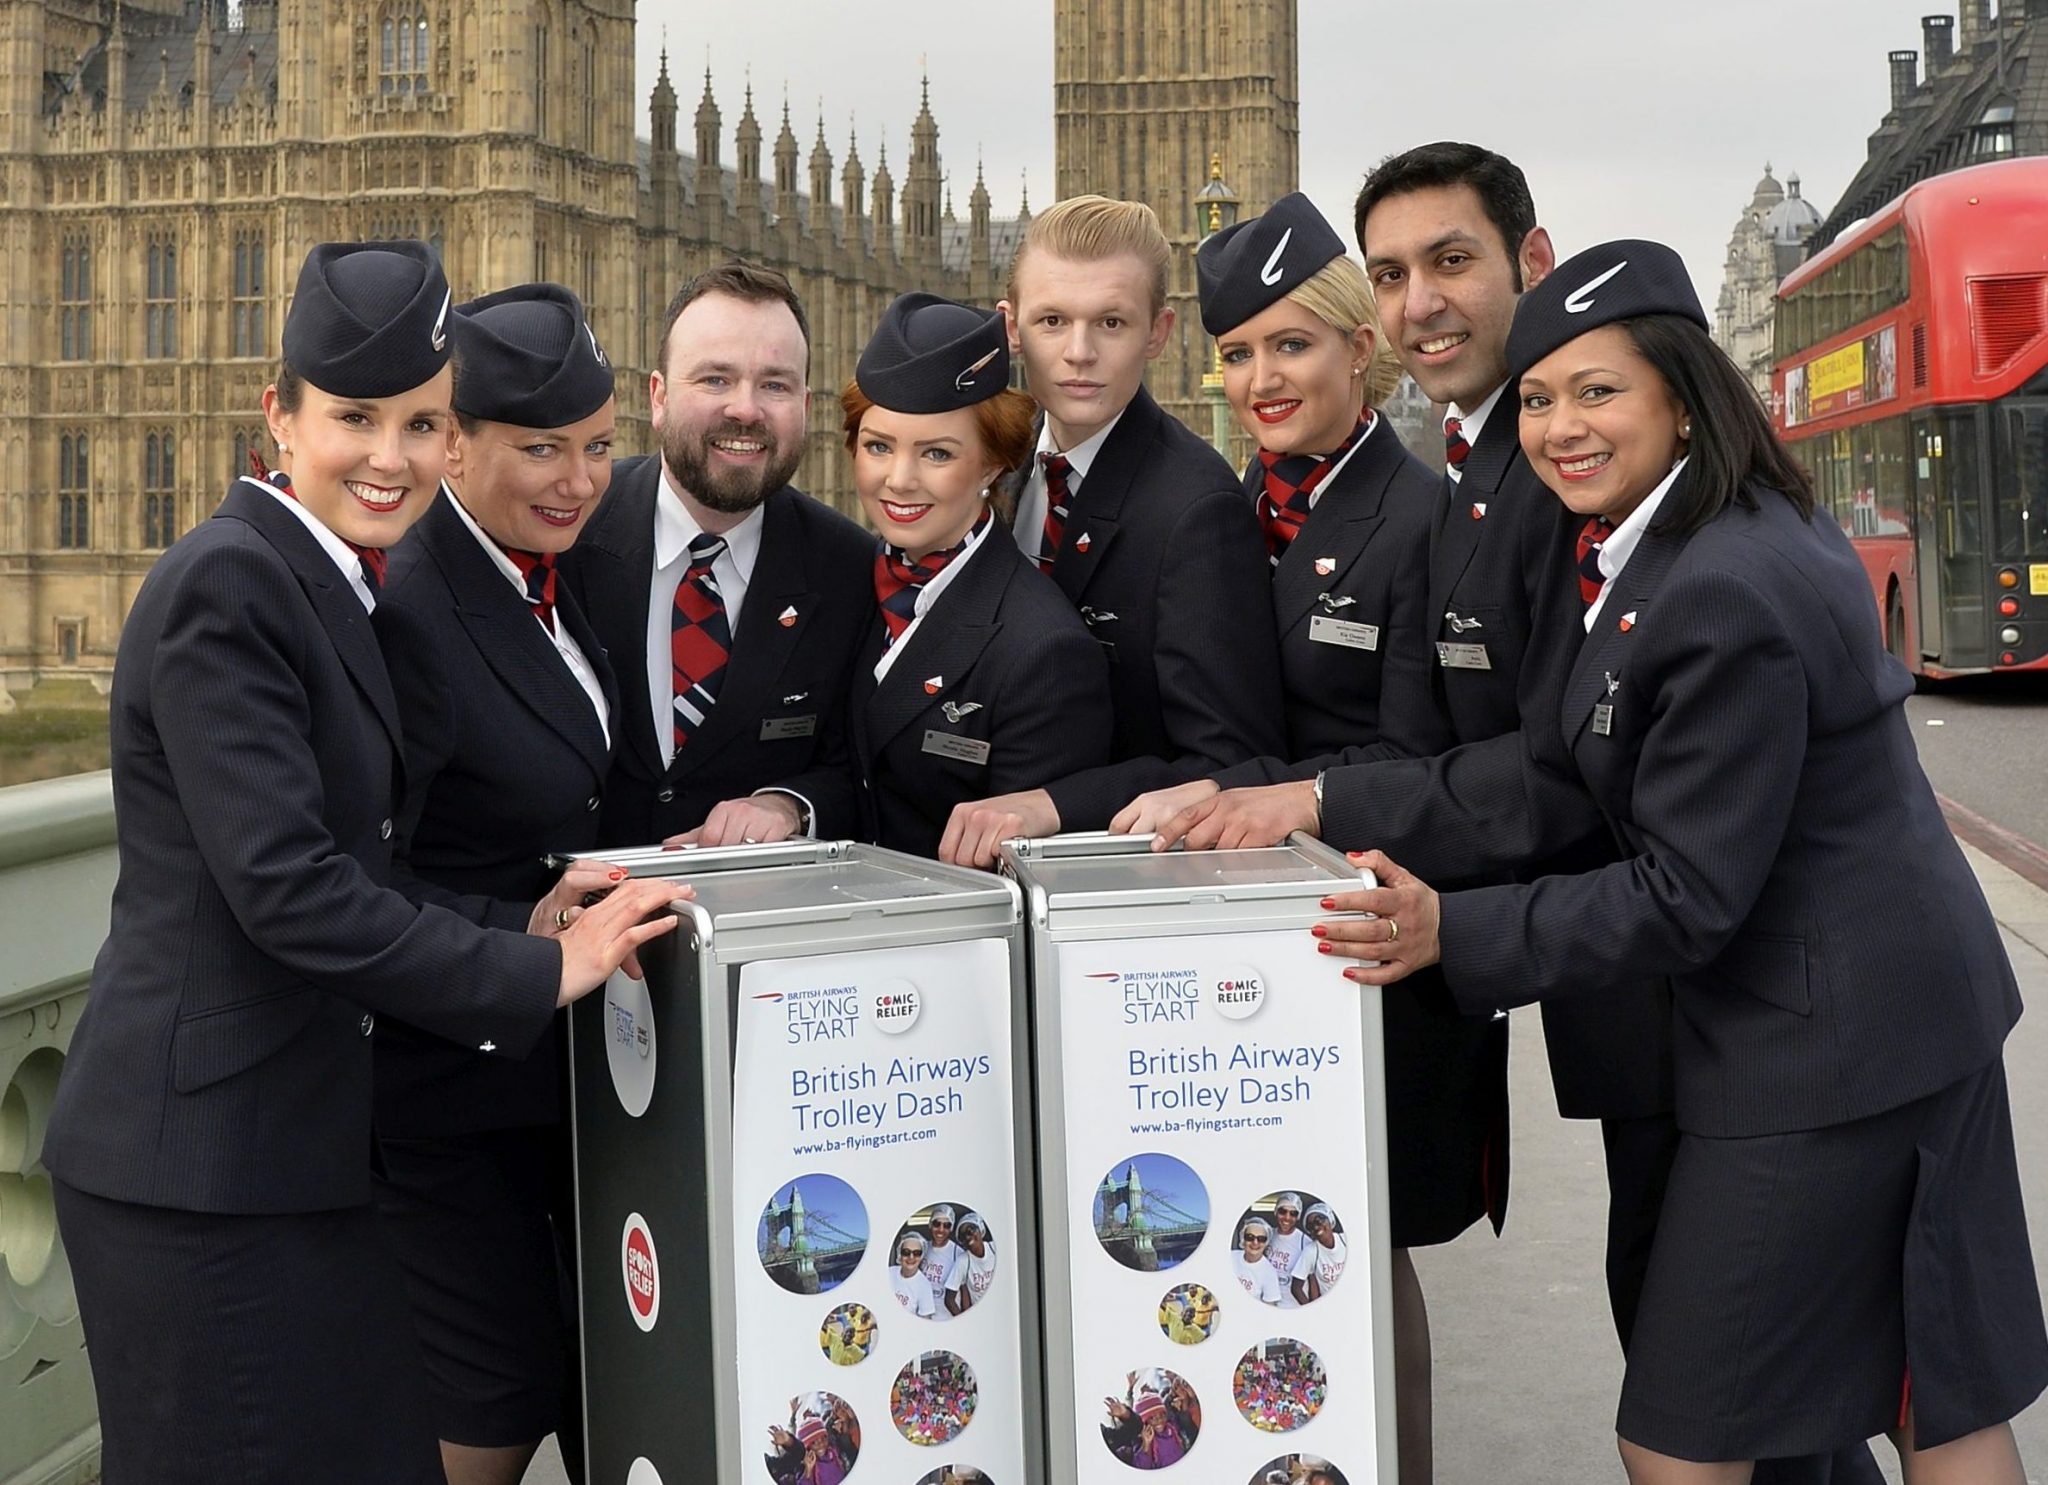 The requirements and essential criteria for British Airways cabin crew